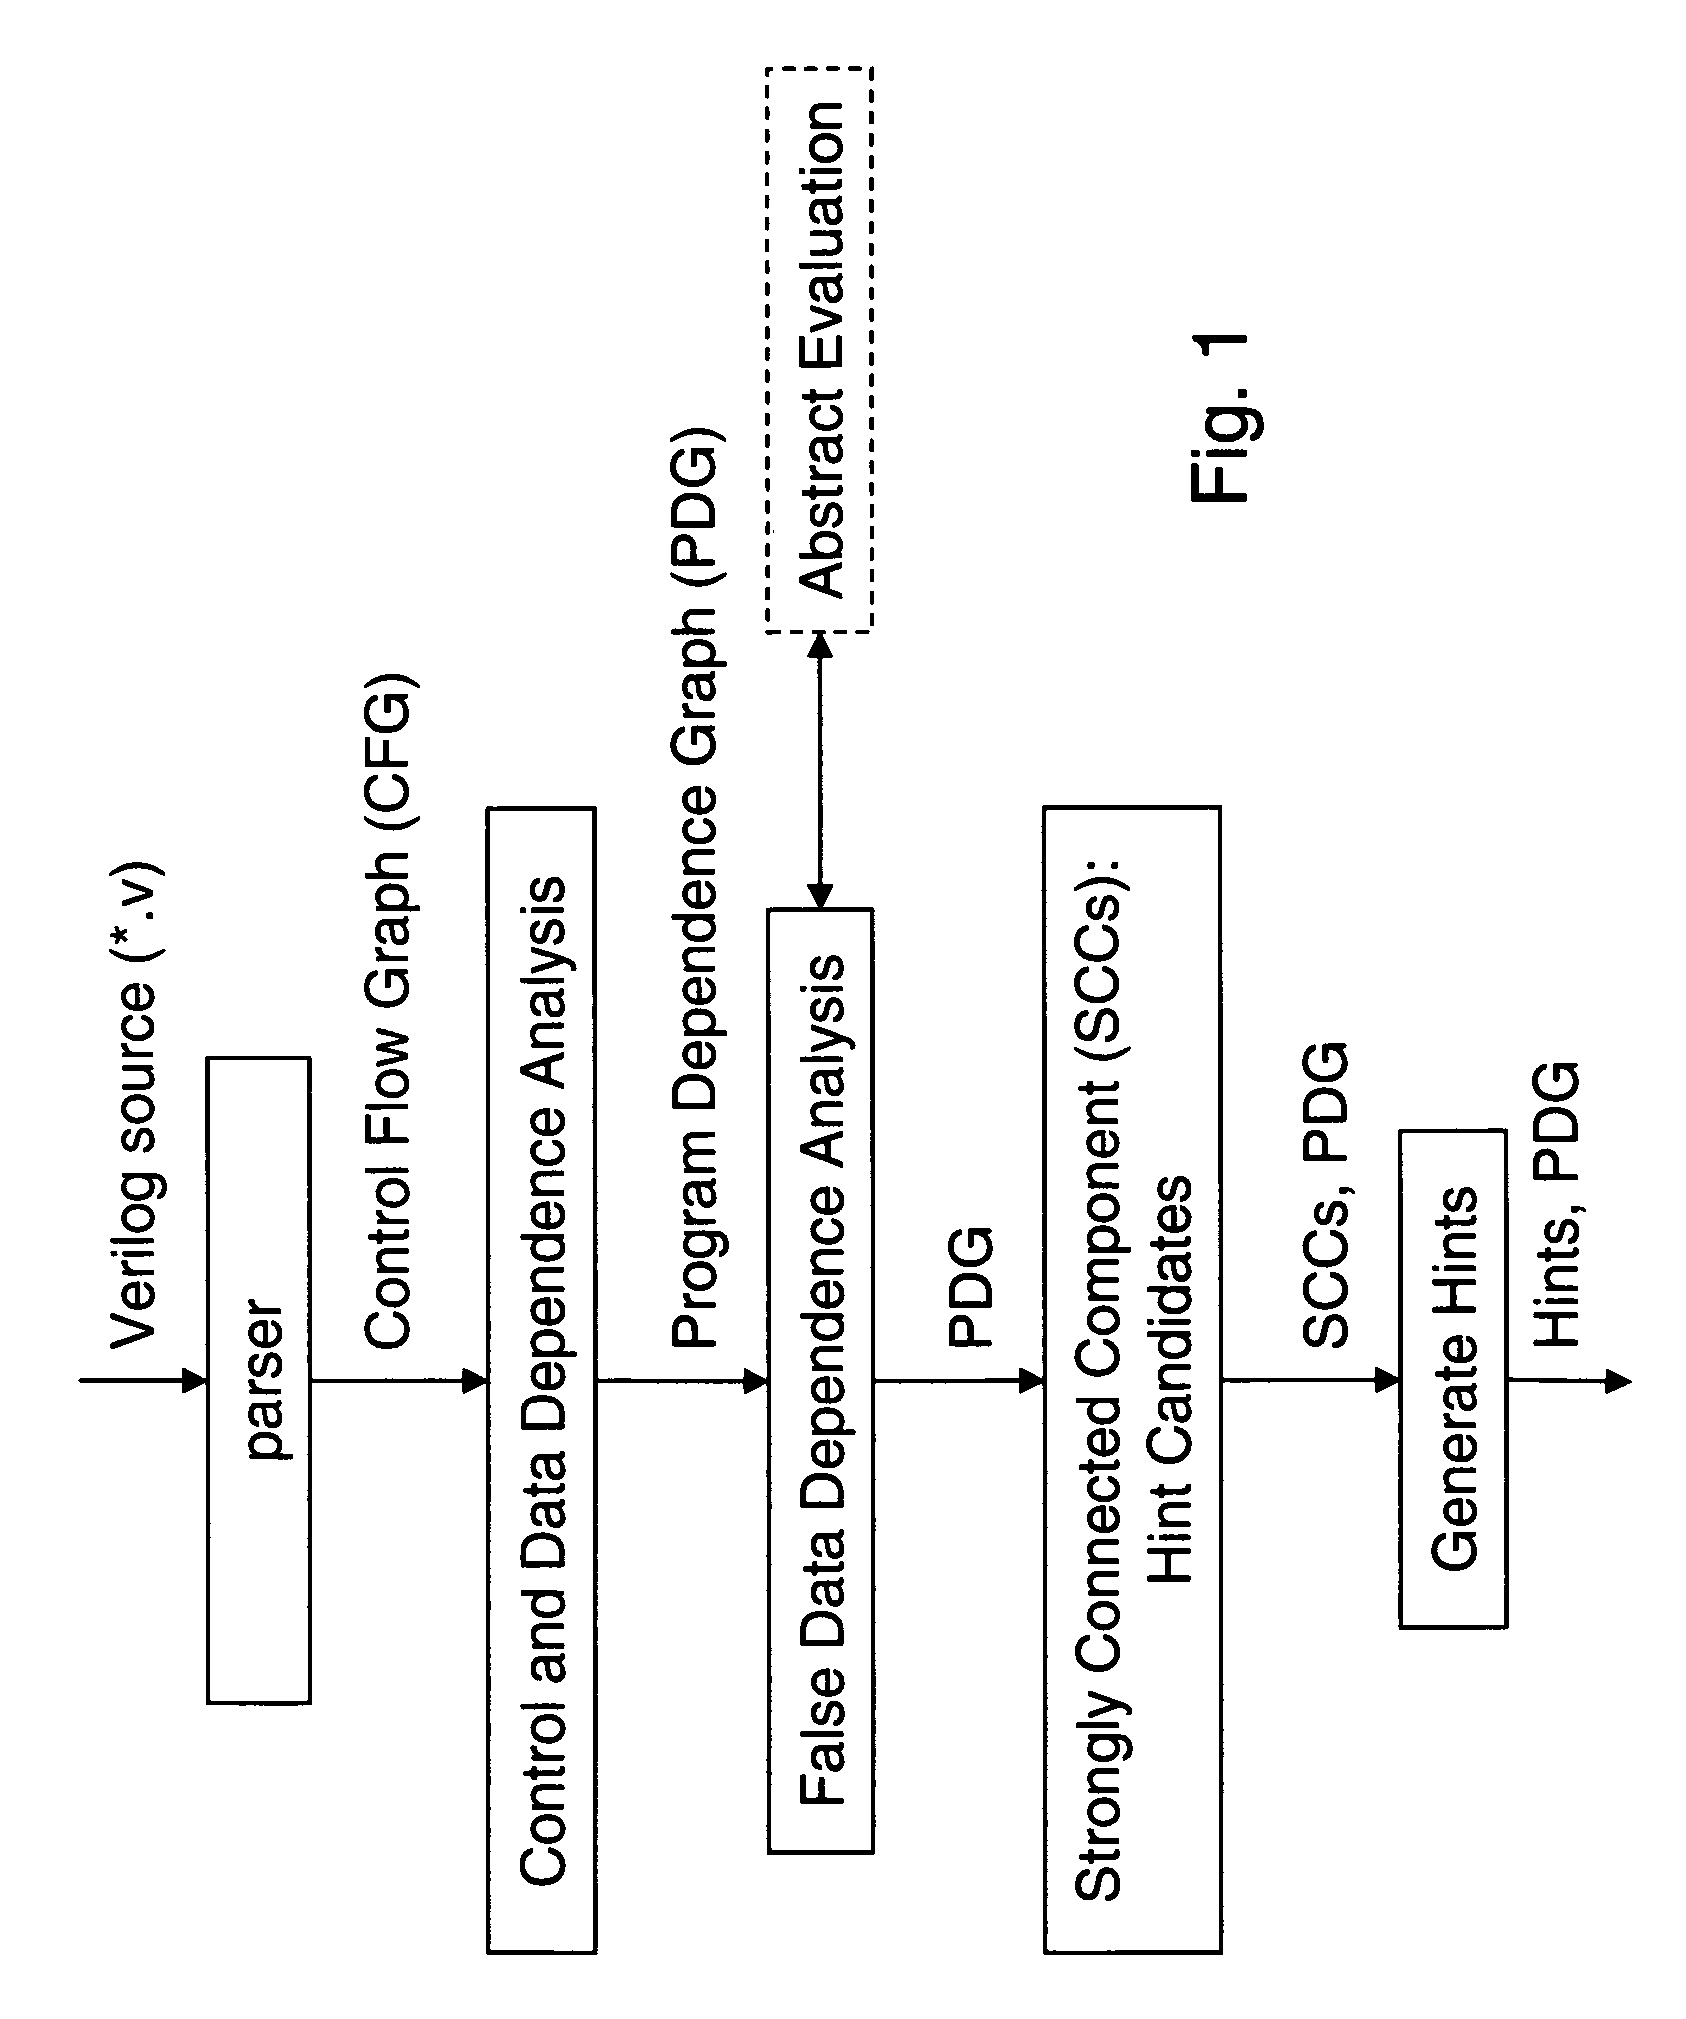 Method for optimizing integrated circuit device design and service